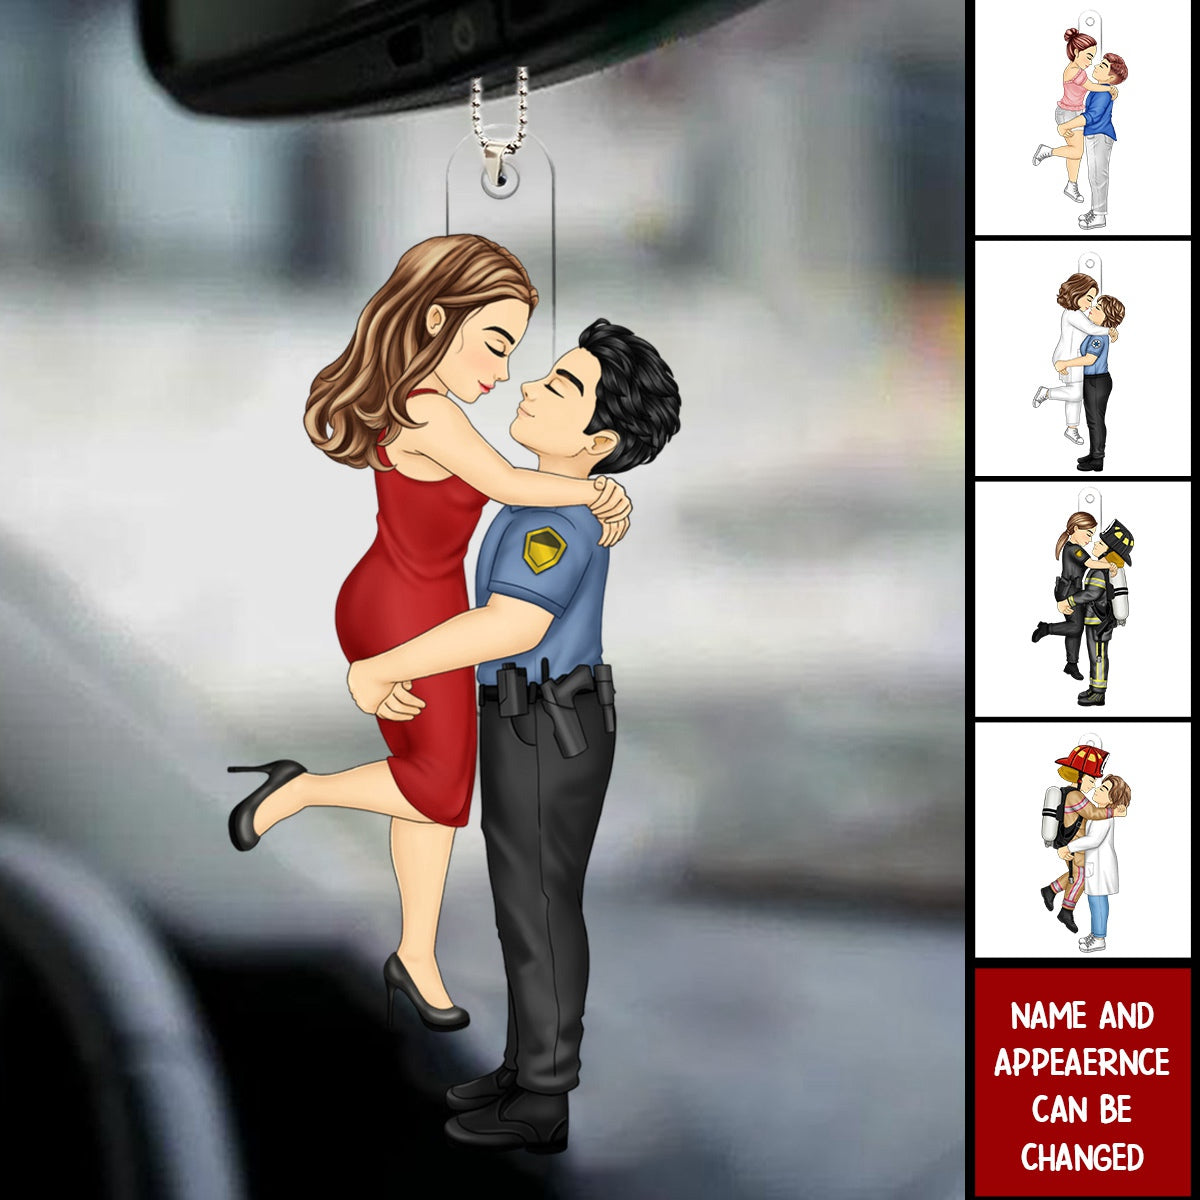 Kissing Couple - Loving, Anniversary Gift For Spouse, Husband, Wife - Personalized Acrylic Car Ornament